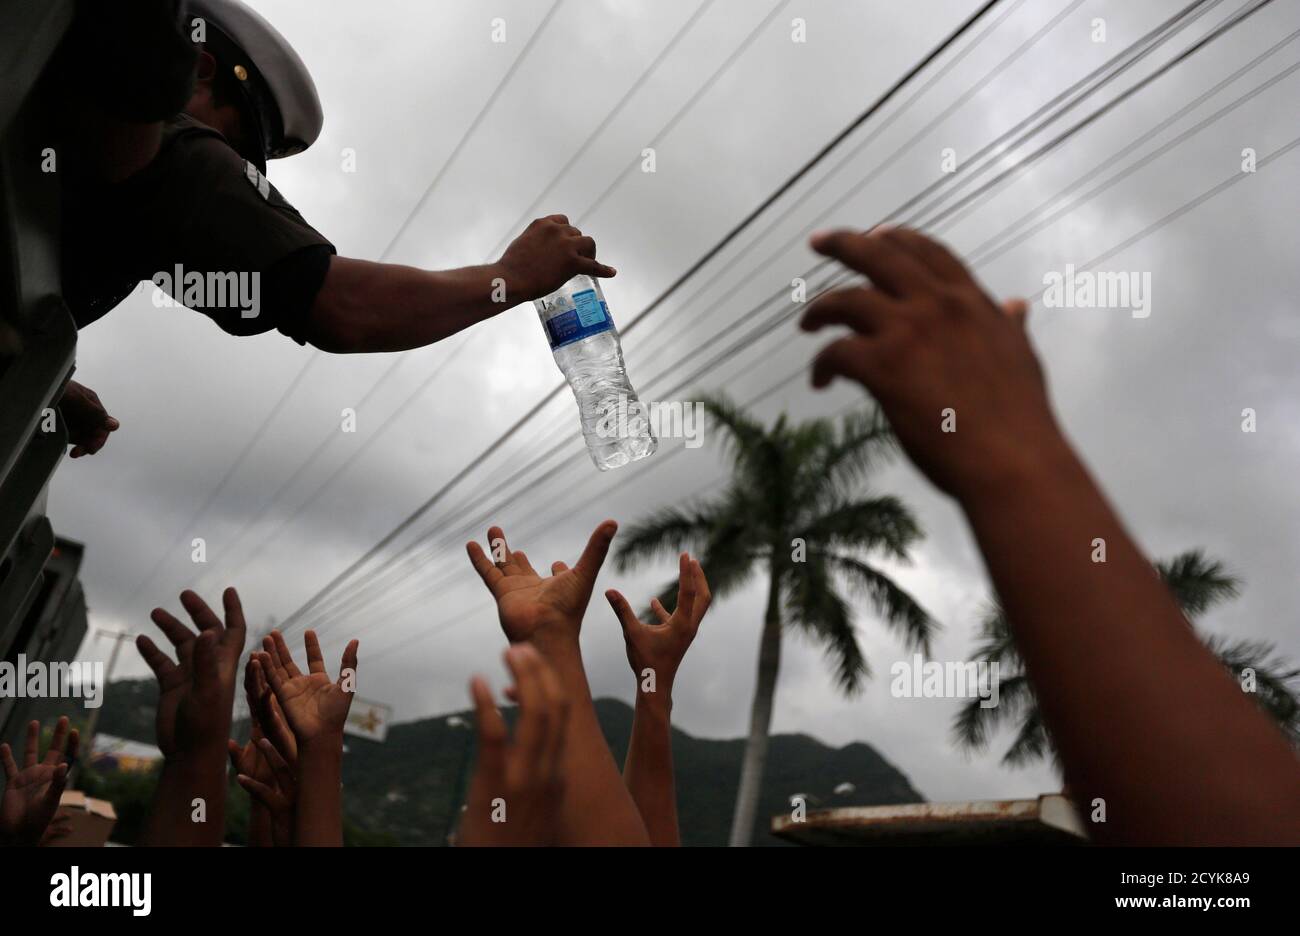 A soldier hands out bottled water to residents in Acapulco September 18, 2013. Looting broke out in the flooded Mexican beach resort of Acapulco on Wednesday as the government struggled to reach tens of thousands of people cut off by flooding that had claimed at least 80 lives. REUTERS/Tomas Bravo (MEXICO - Tags: DISASTER ENVIRONMENT MILITARY) Stock Photo